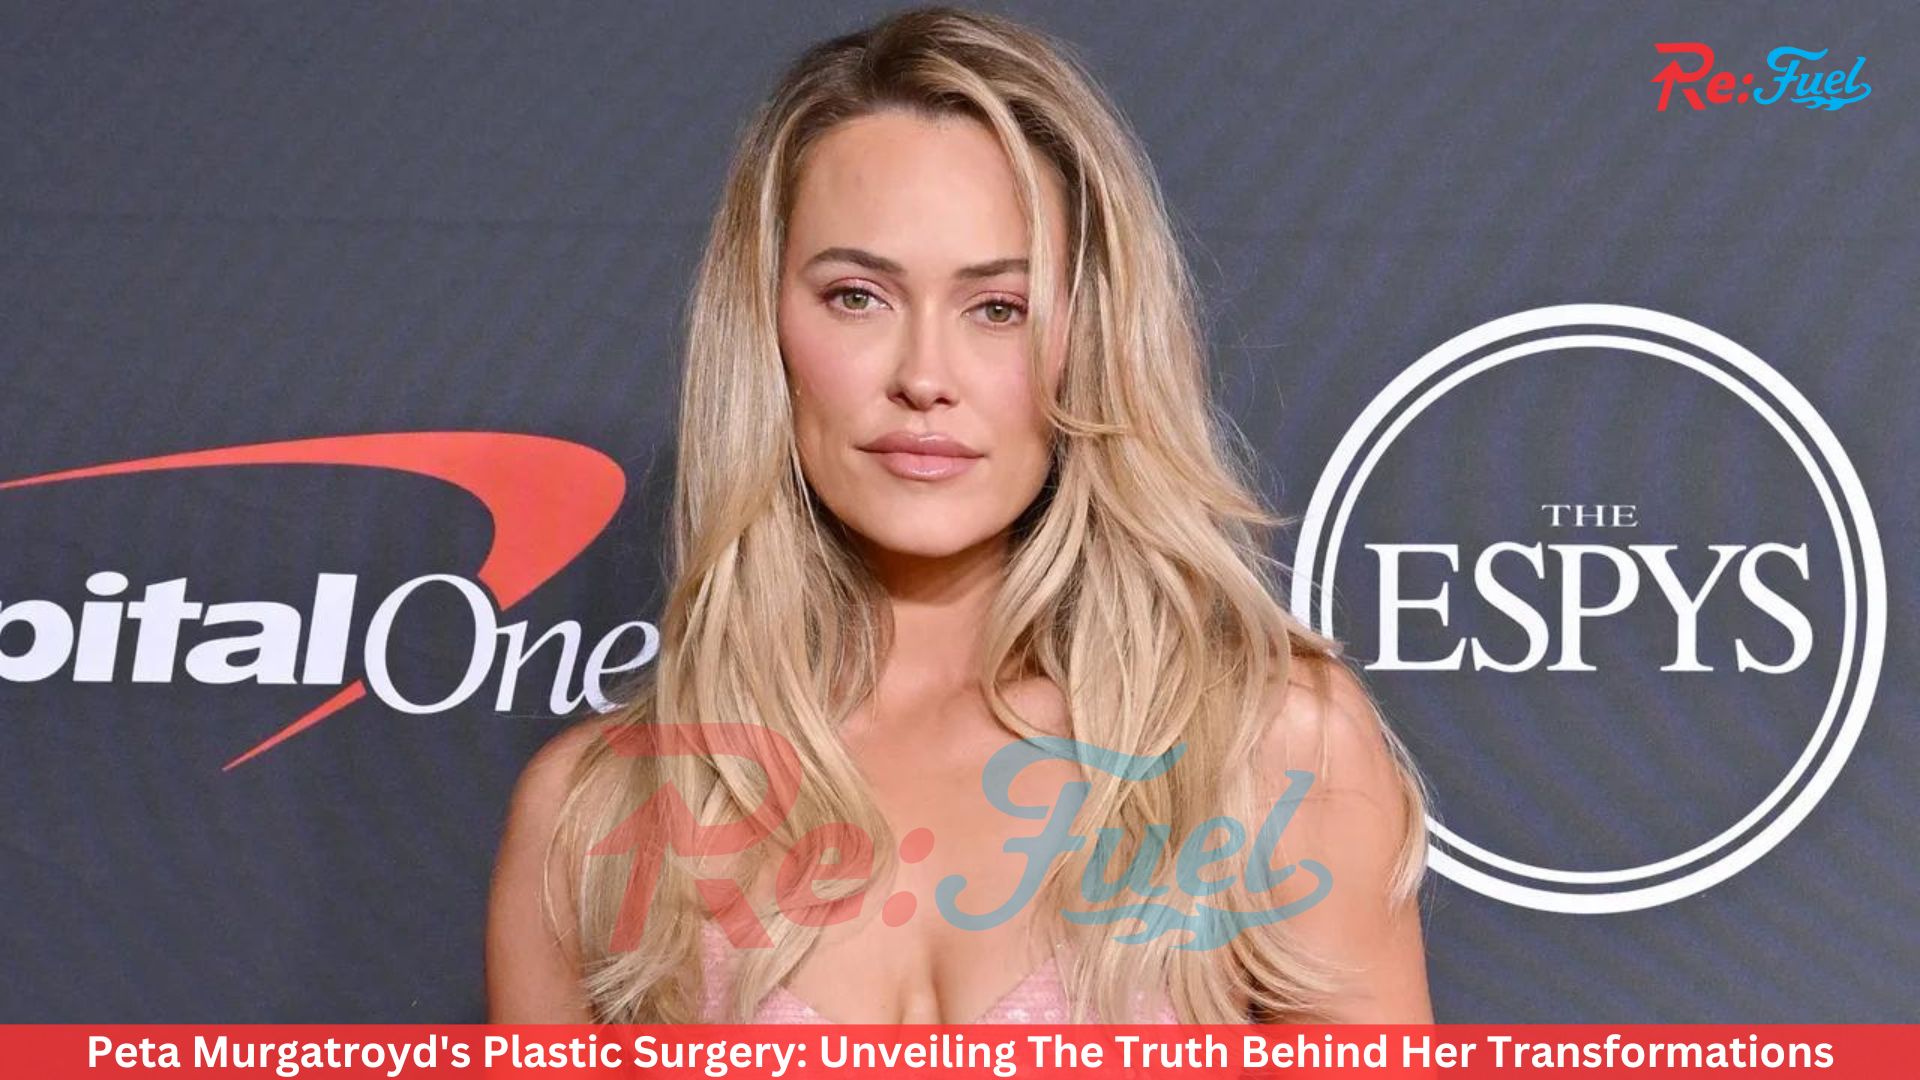 Peta Murgatroyd's Plastic Surgery: Unveiling The Truth Behind Her Transformations